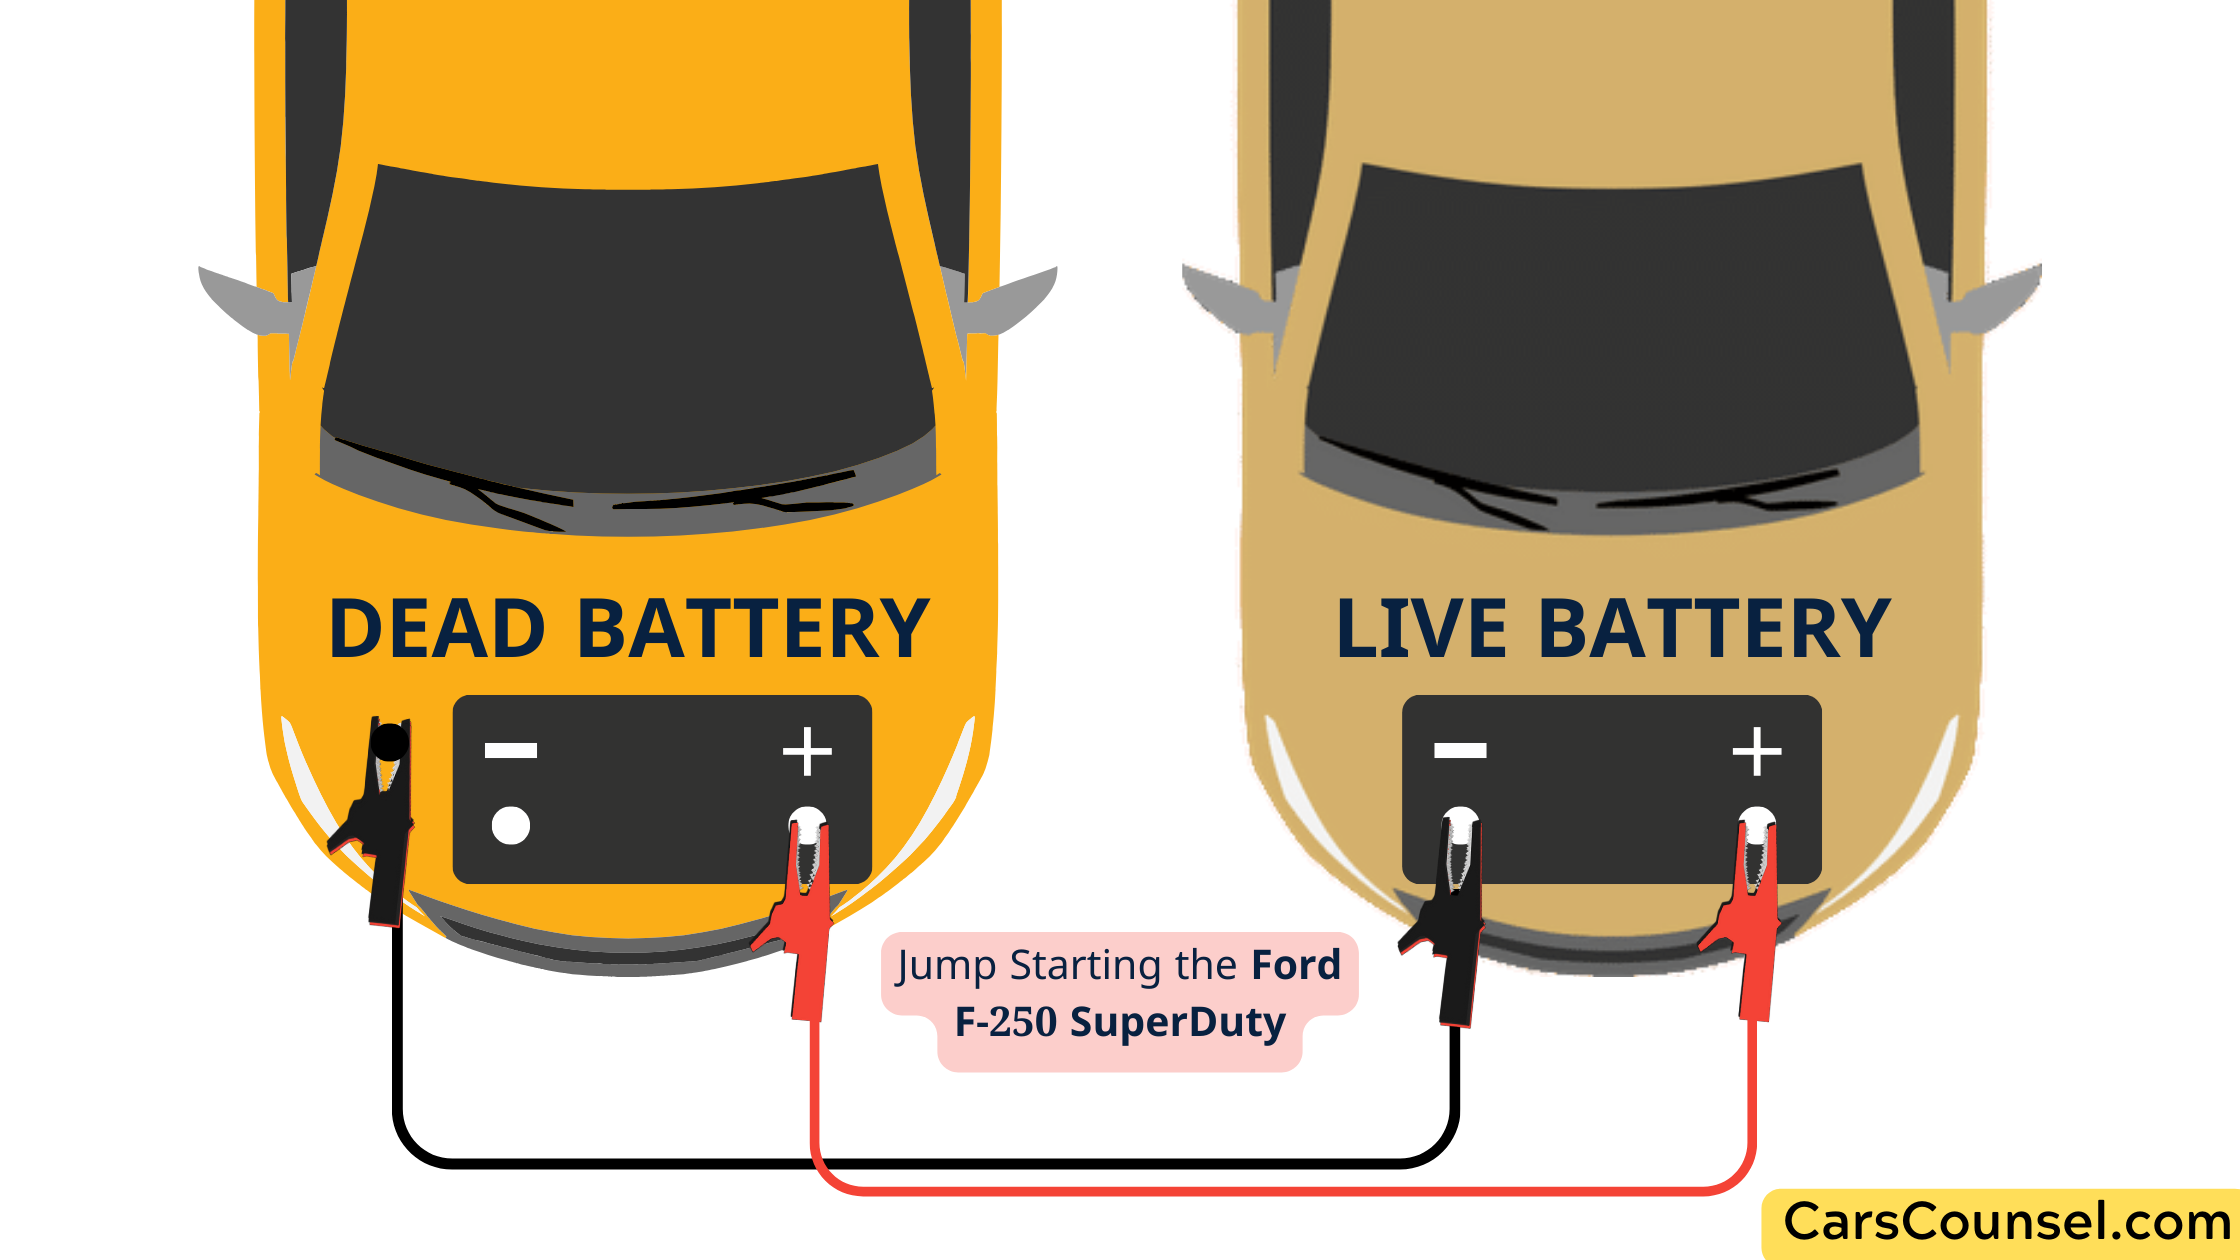 Jump Starting The Ford F 250 Superduty